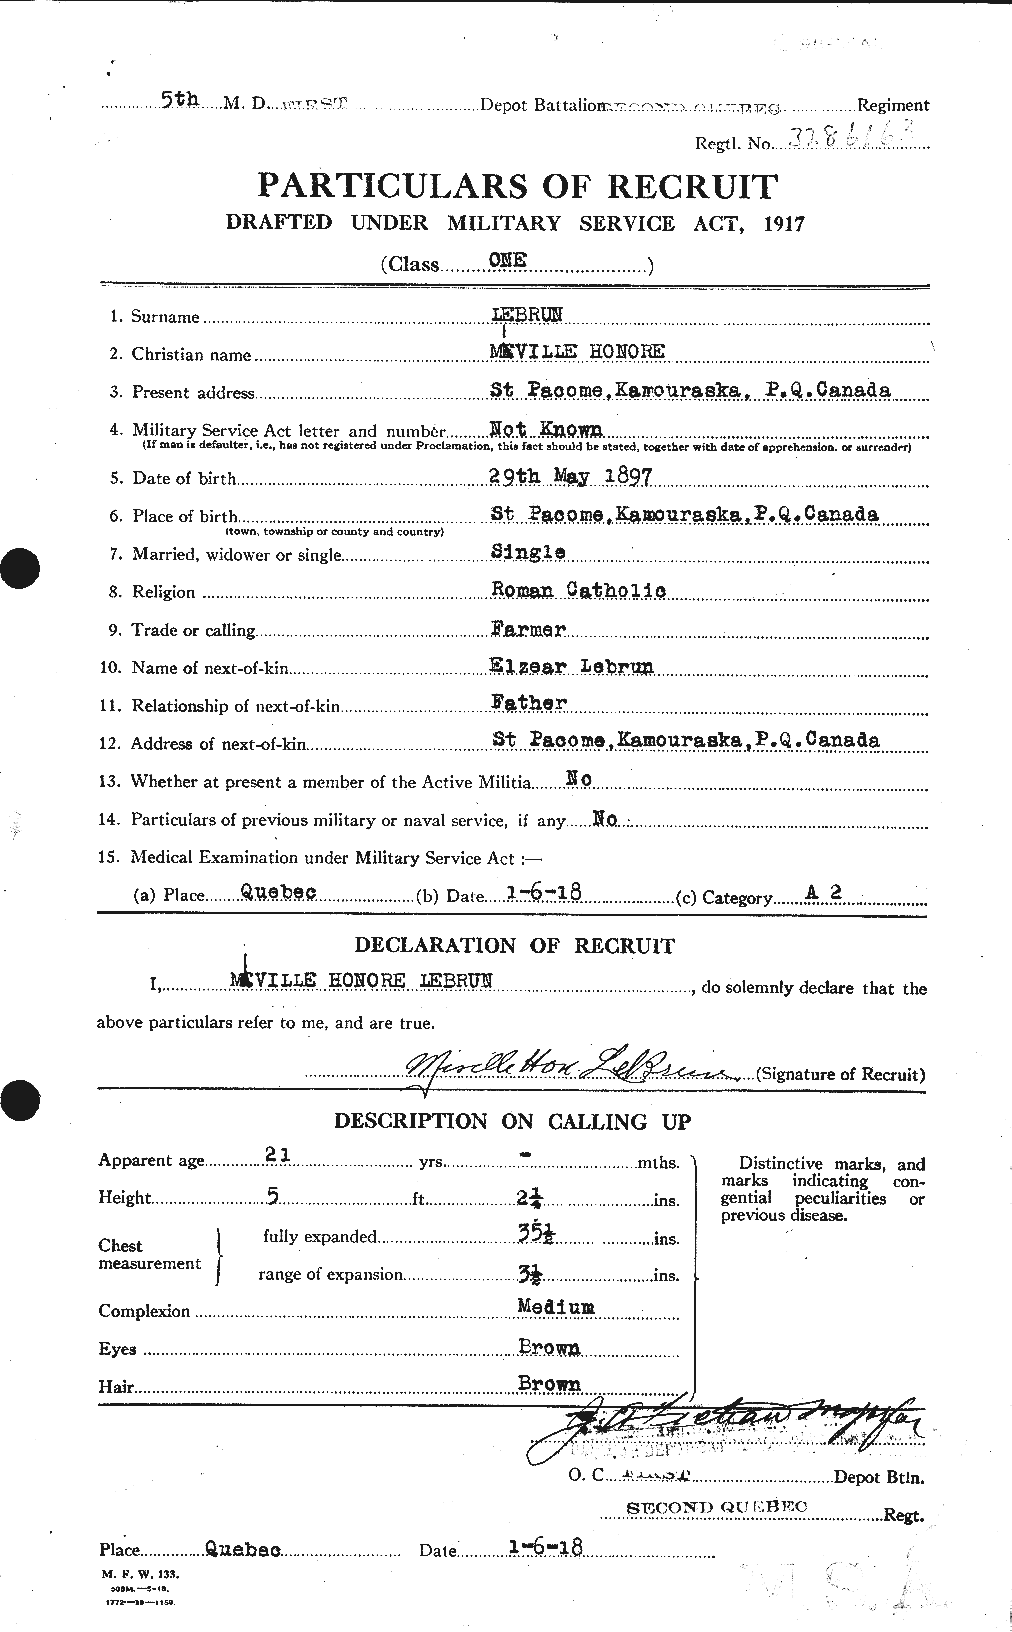 Personnel Records of the First World War - CEF 461582a